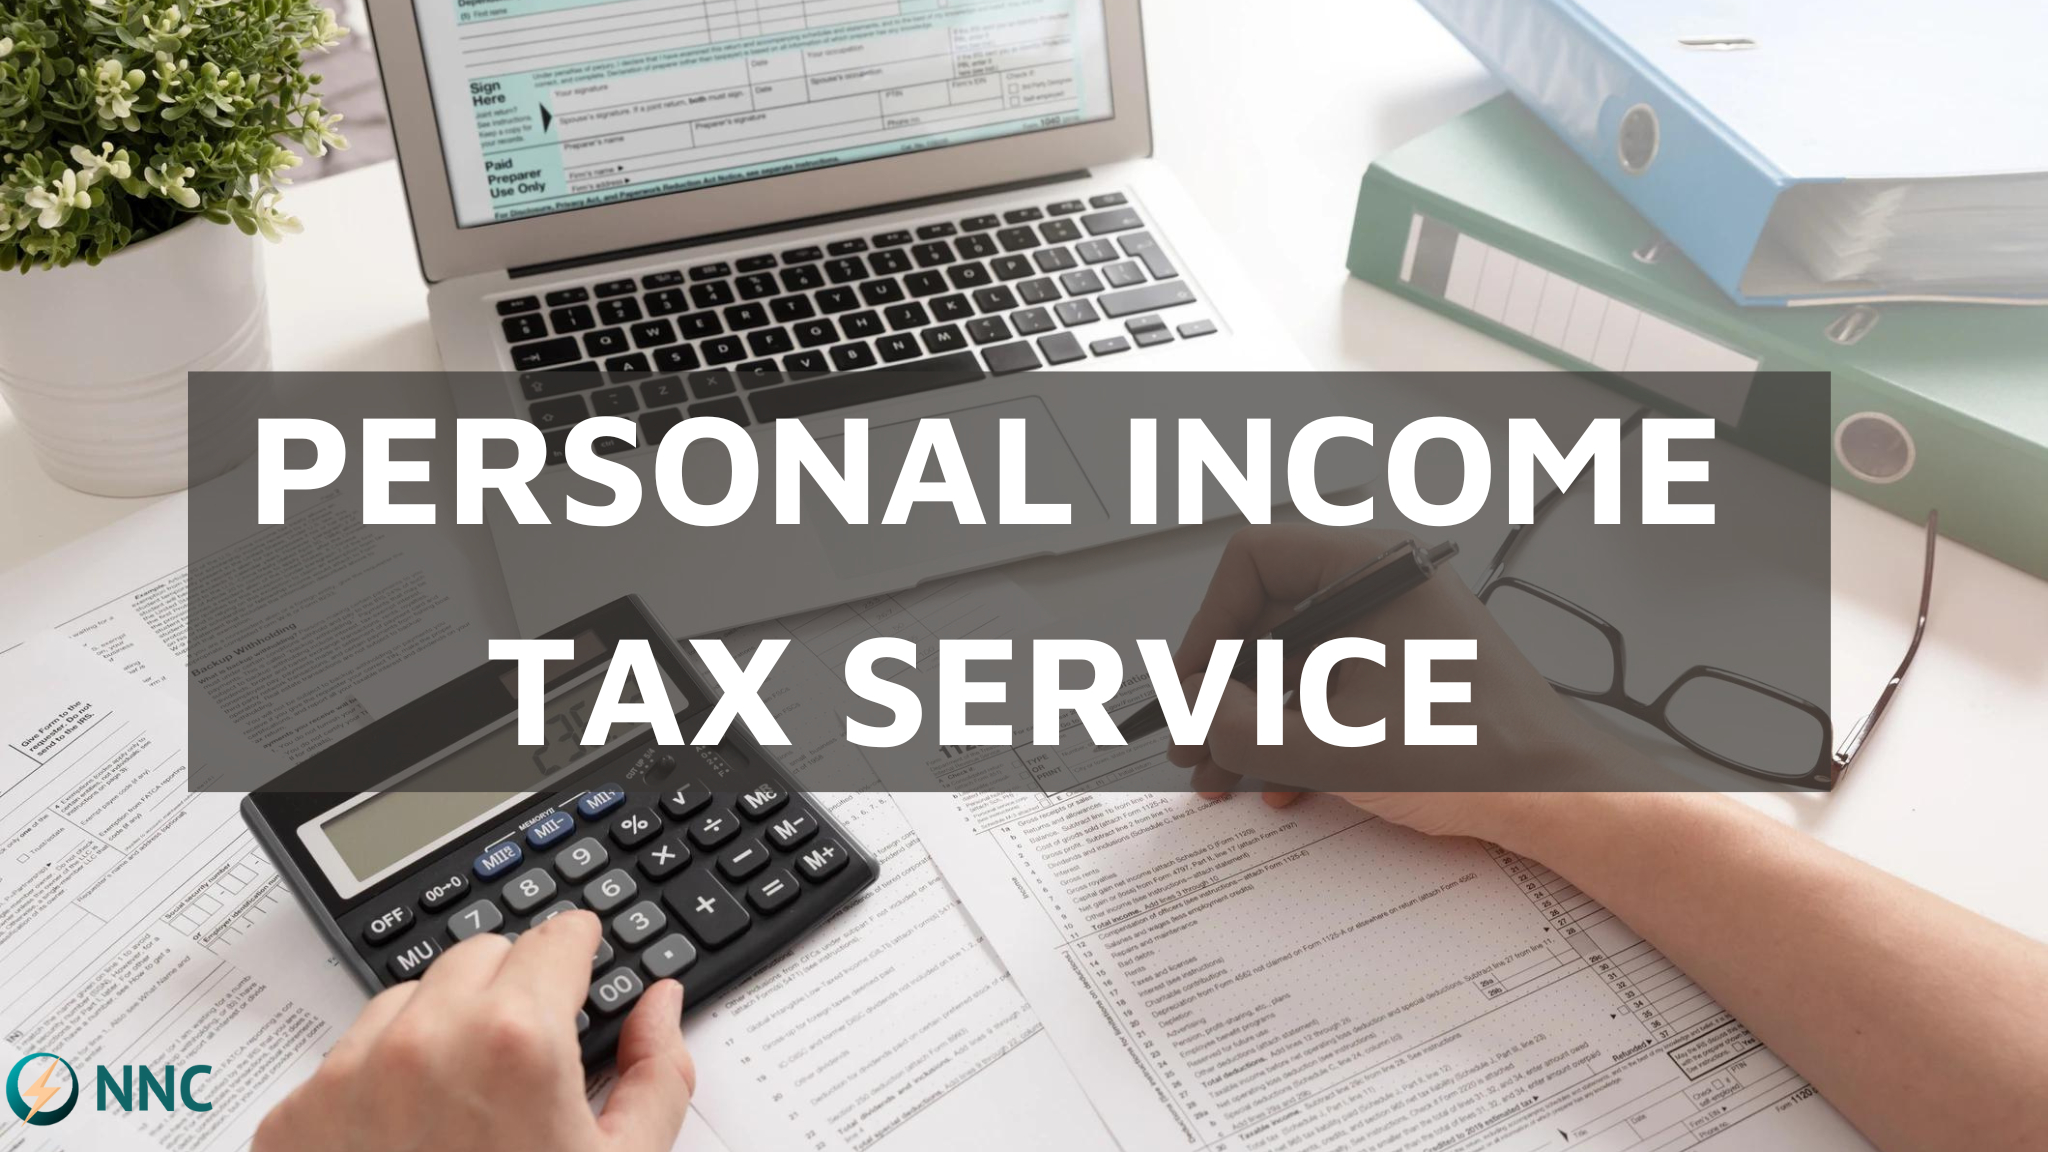 Why choose Tax Services at NNC